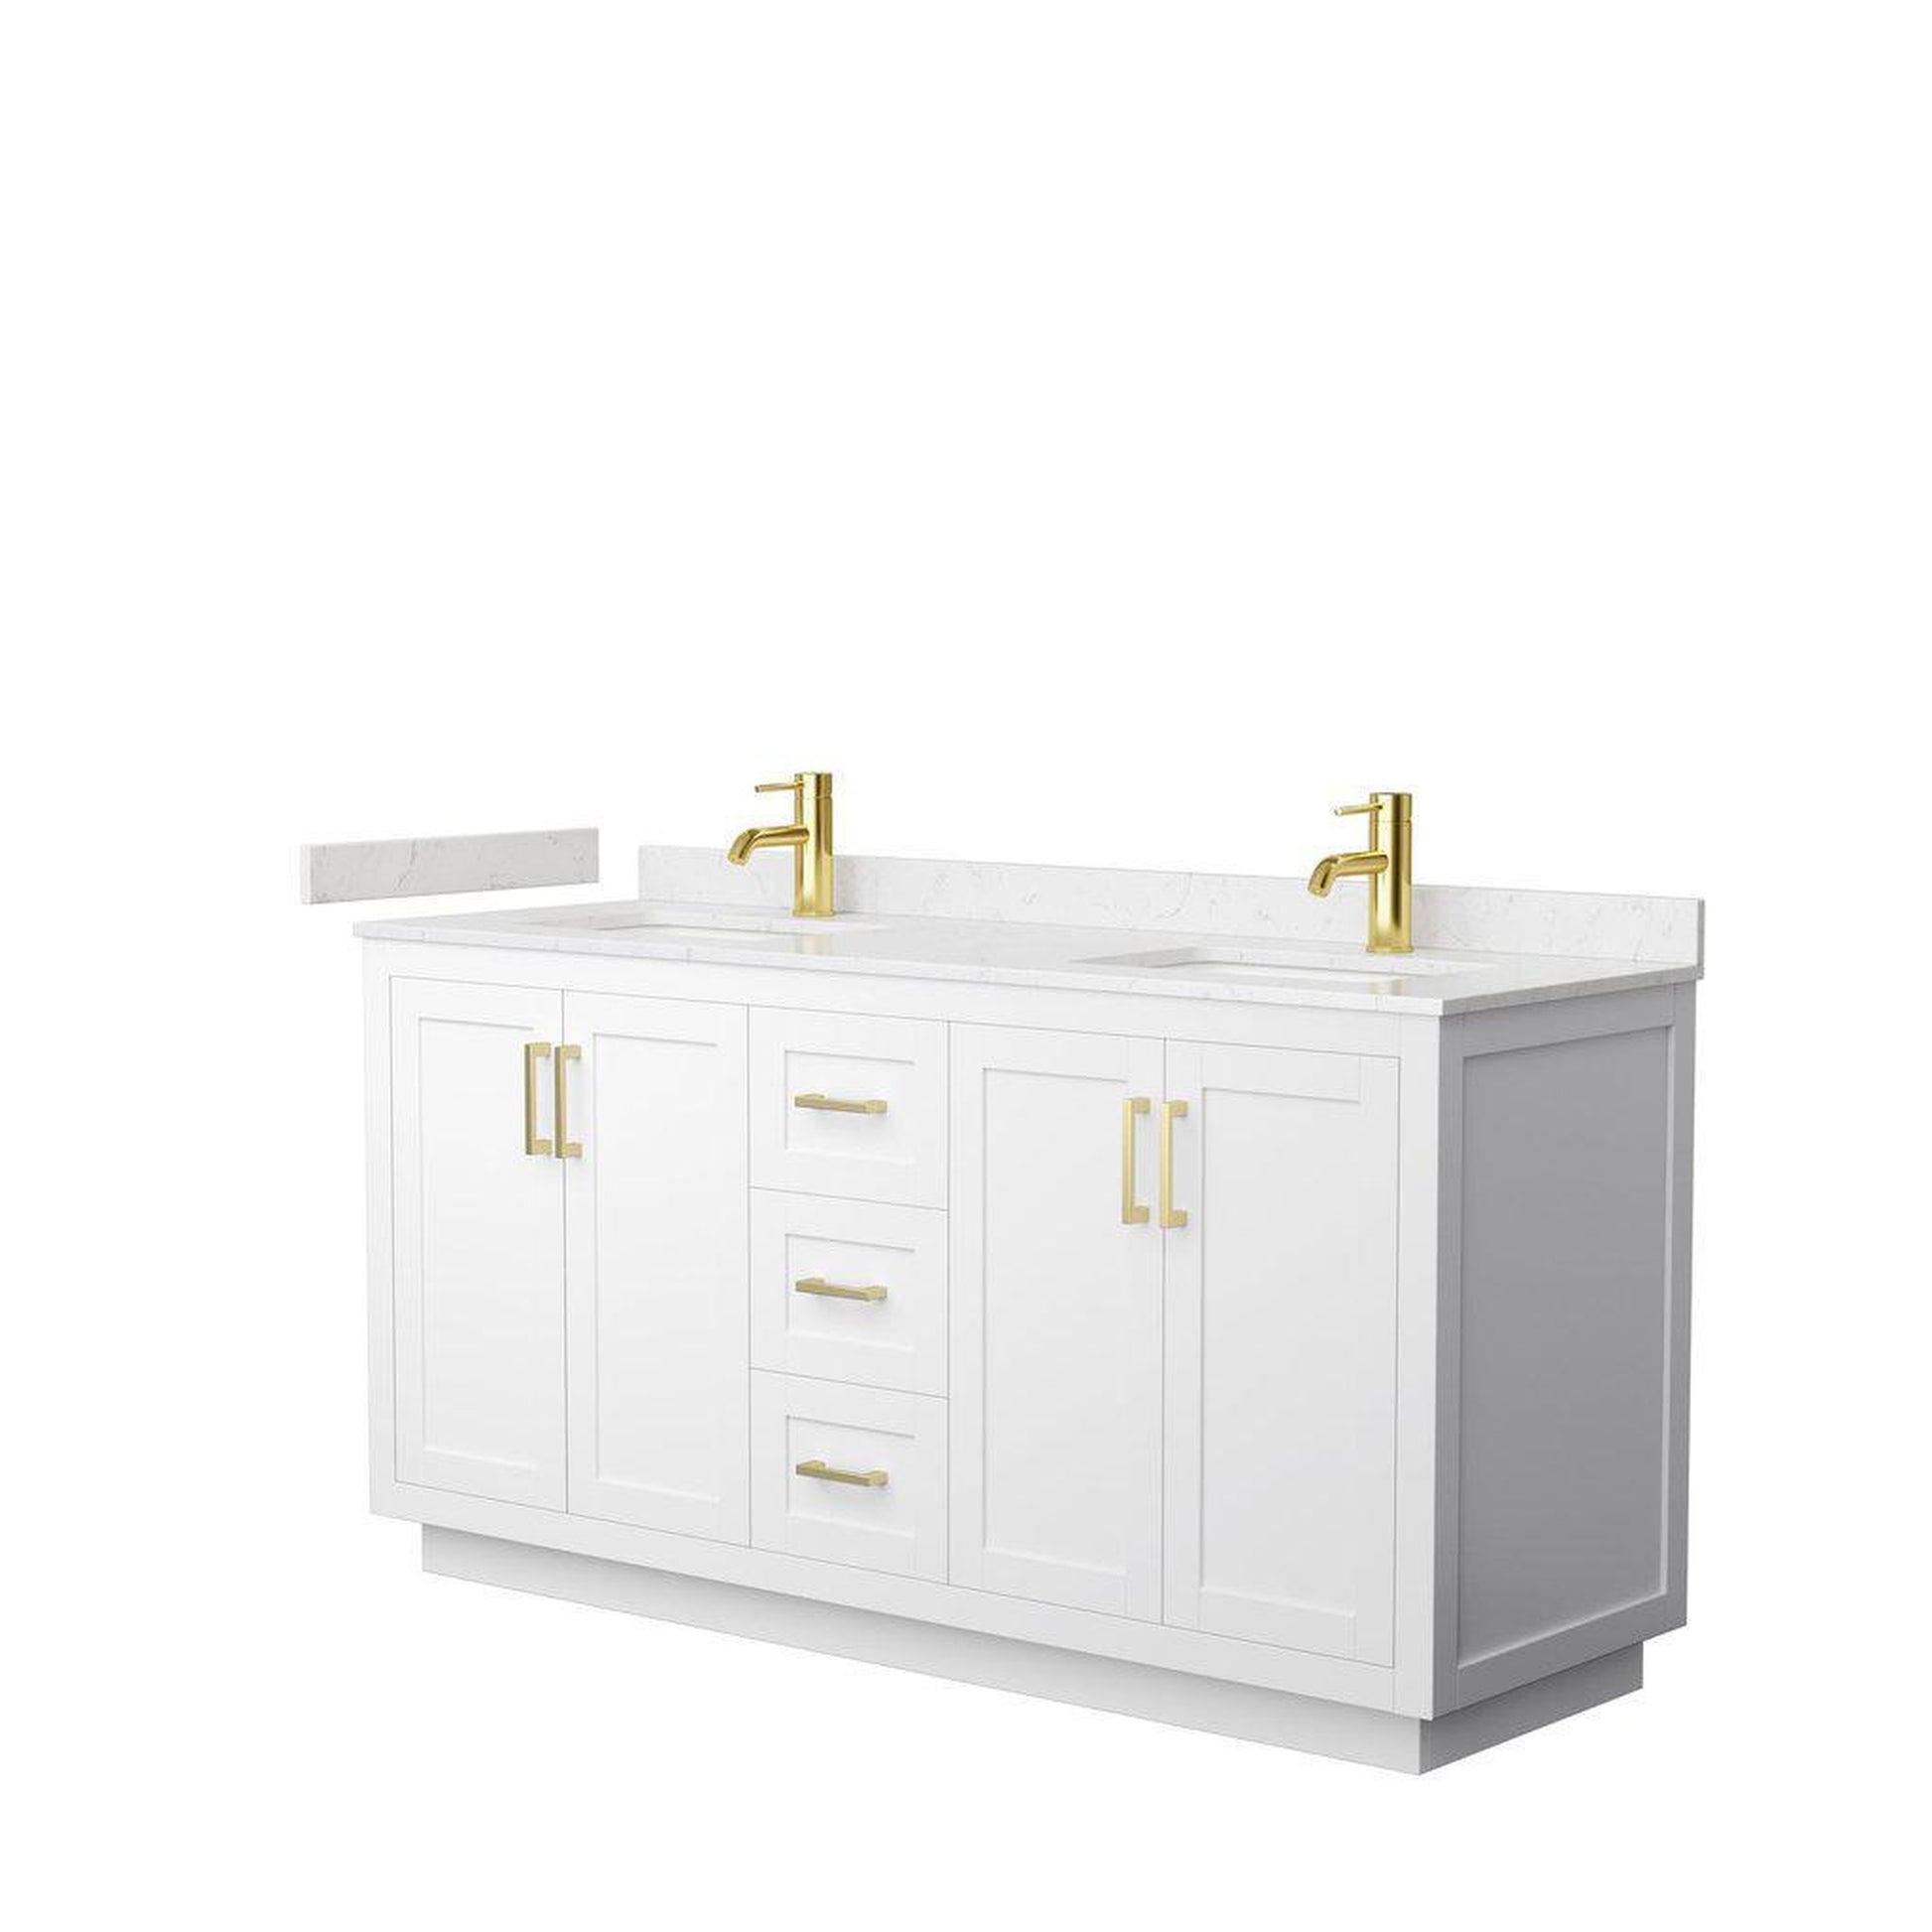 Wyndham Collection Miranda 66" Double Bathroom White Vanity Set With Light-Vein Carrara Cultured Marble Countertop, Undermount Square Sink, And Brushed Gold Trim